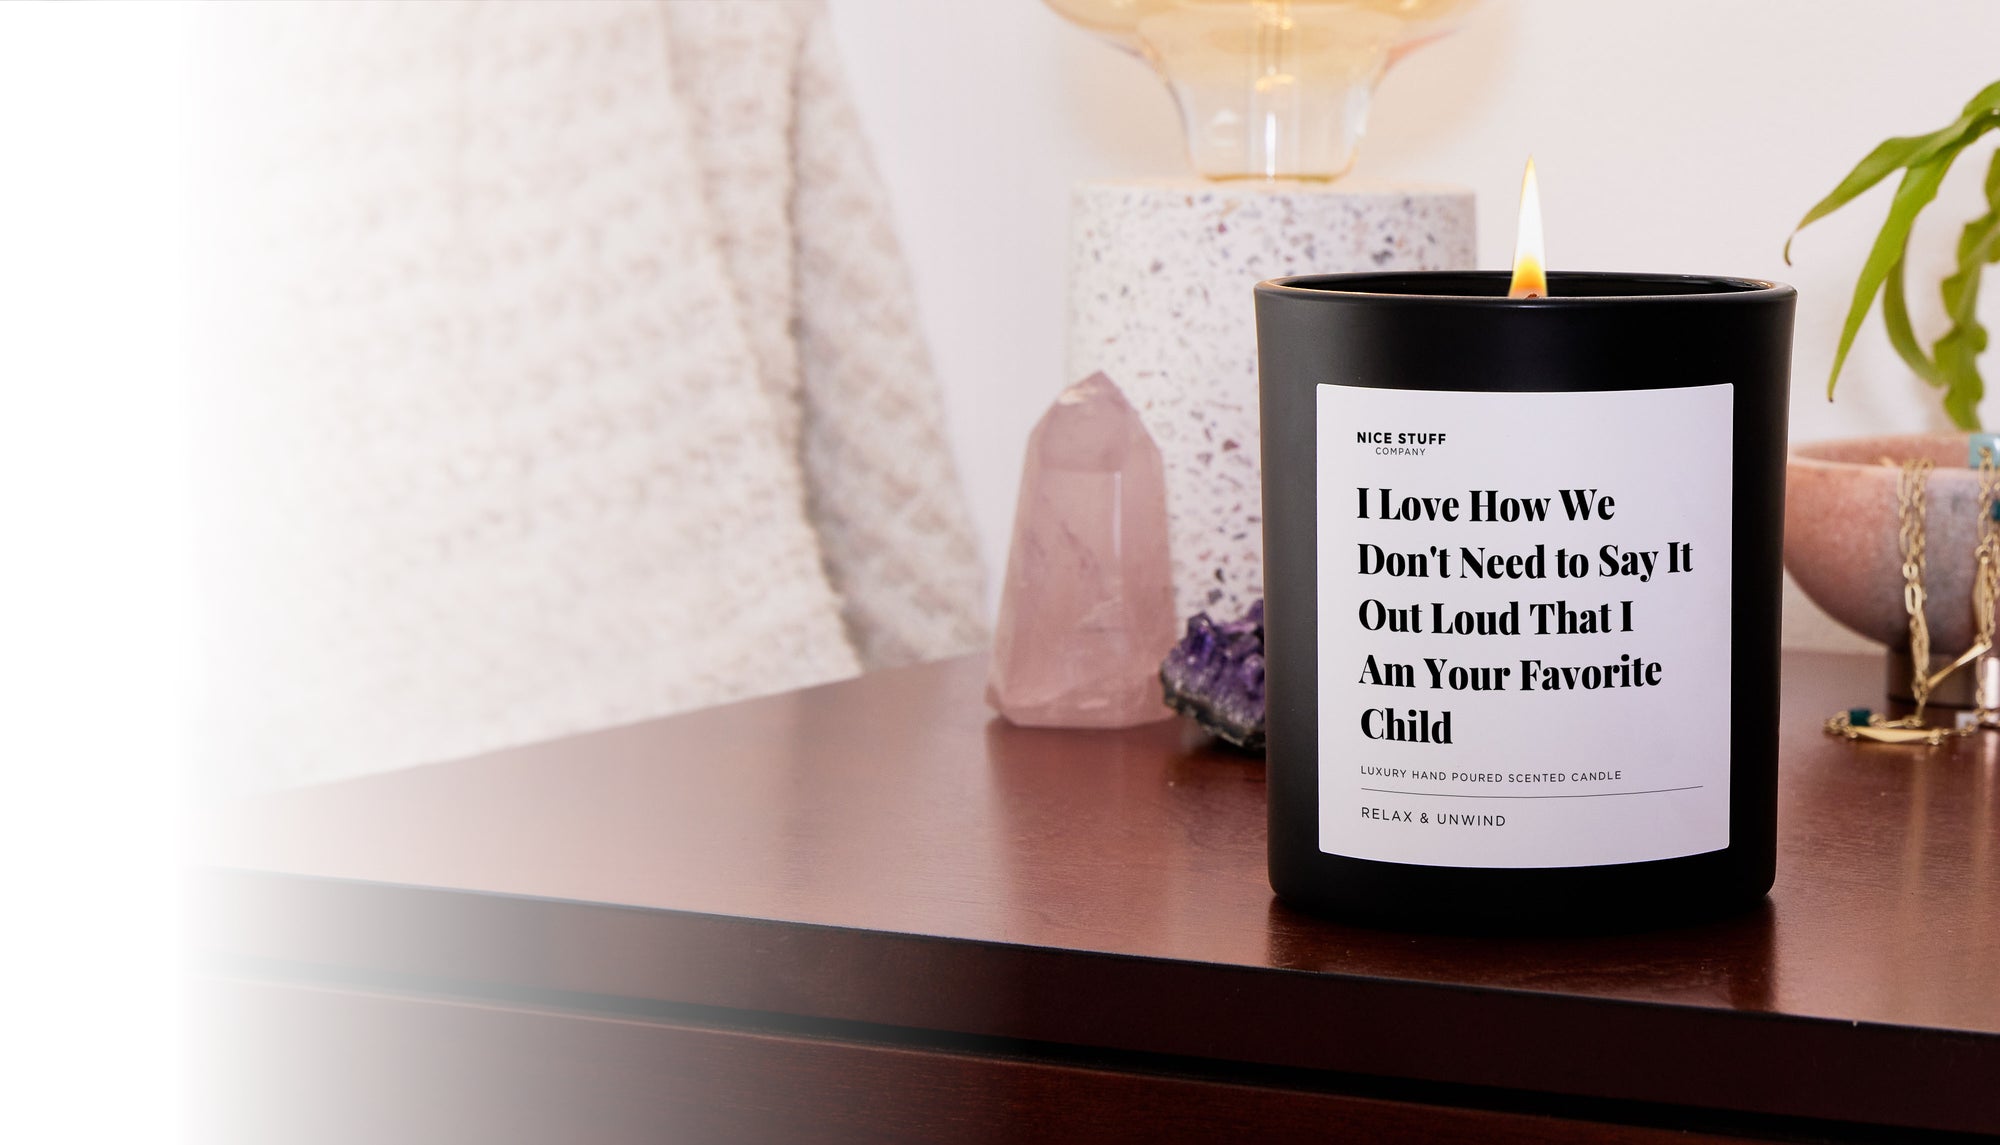 For Mom - Large Black Luxury Candle - Relax & Unwind – Nice Stuff For Mom